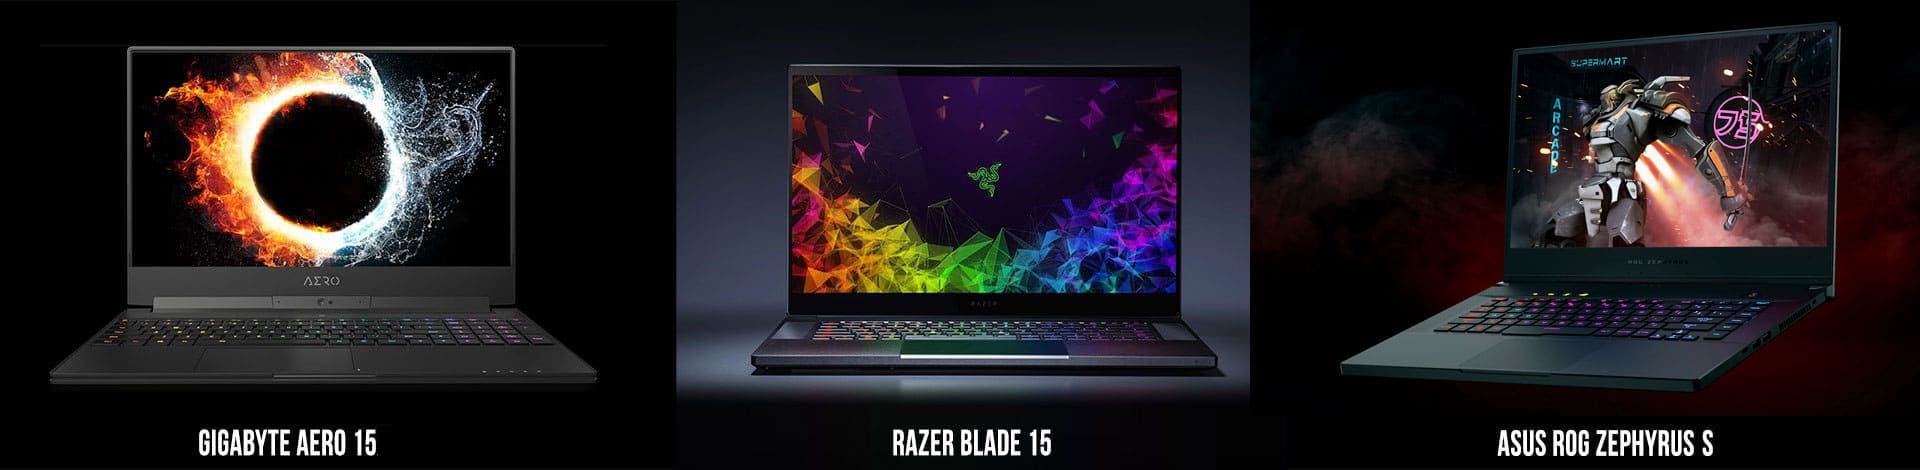 Best gaming laptops and ultrabooks in 2020 (detailed guide)